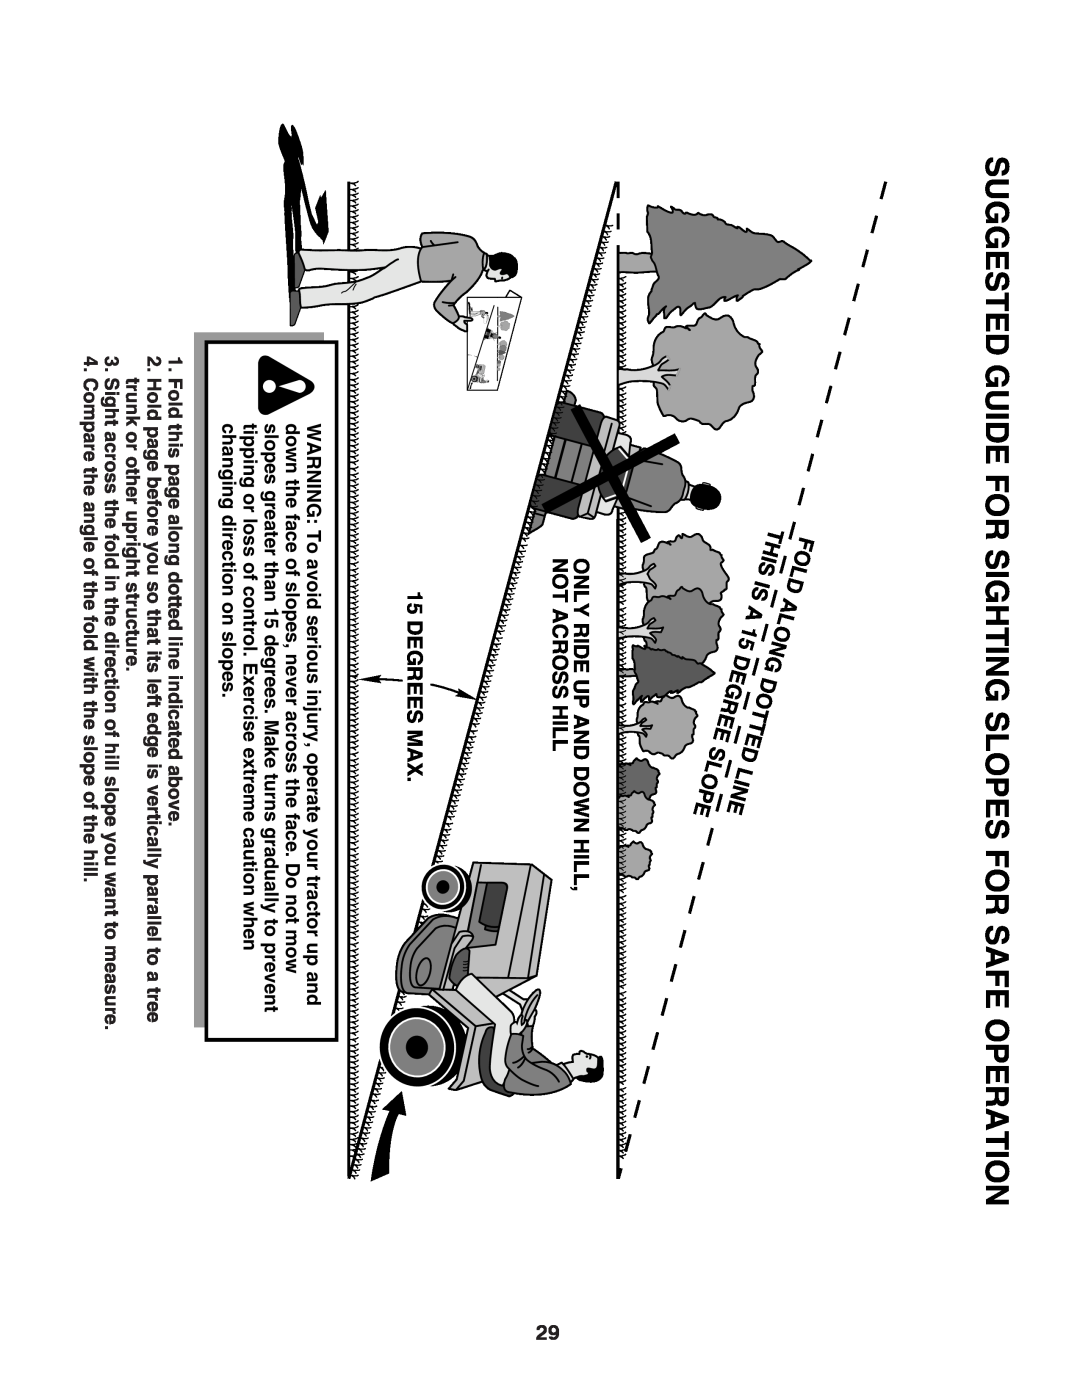 Poulan 425179 manual Suggested Guide For Sighting Slopes For Safe Operation 